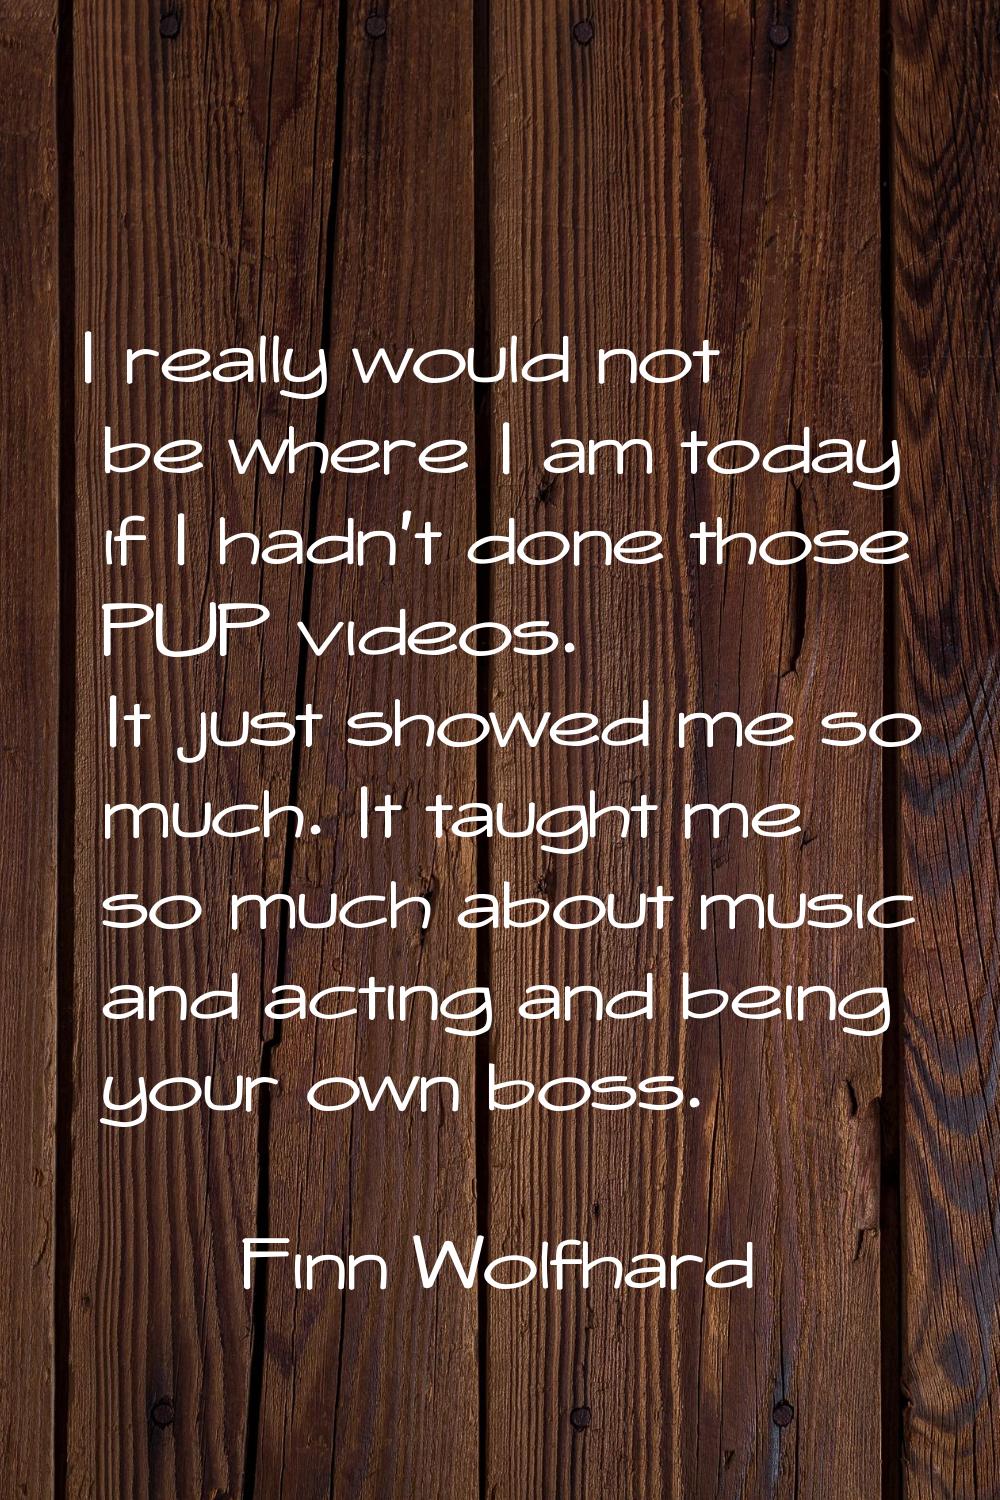 I really would not be where I am today if I hadn't done those PUP videos. It just showed me so much